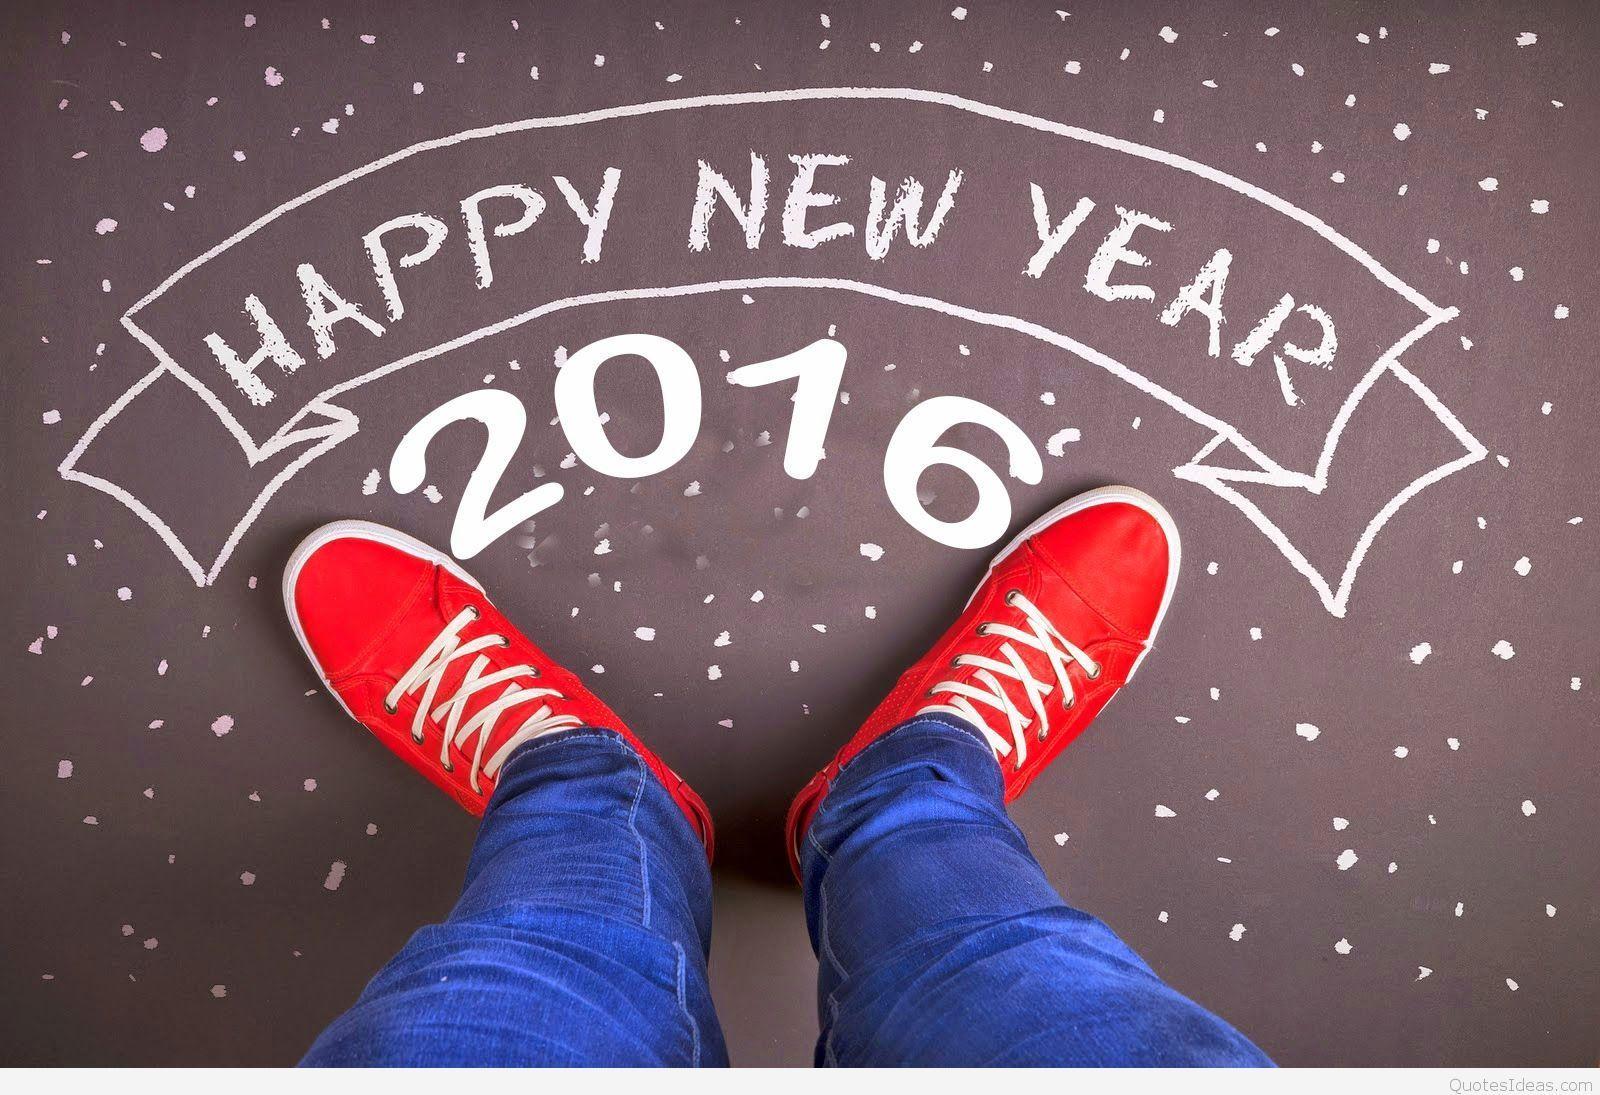 Best Funny Happy New Year Sayings, wallpaper, Image 2016